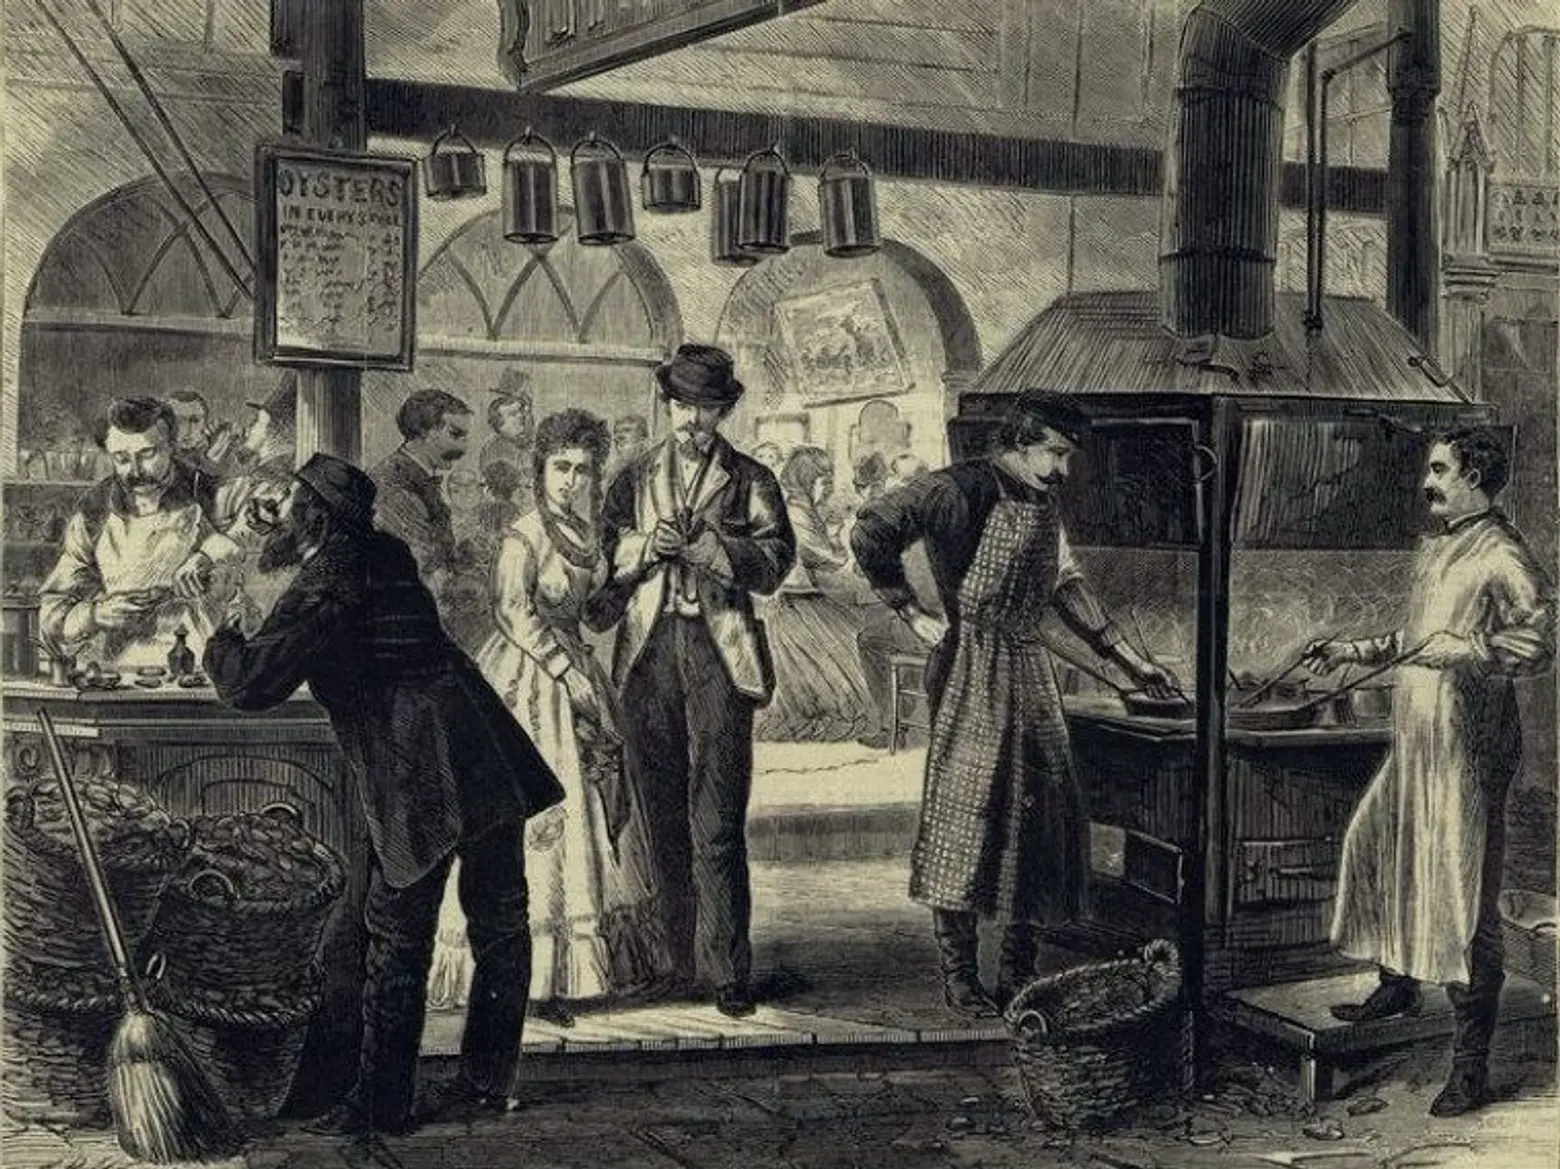 From oysters to falafel: The complete history of street vending in NYC